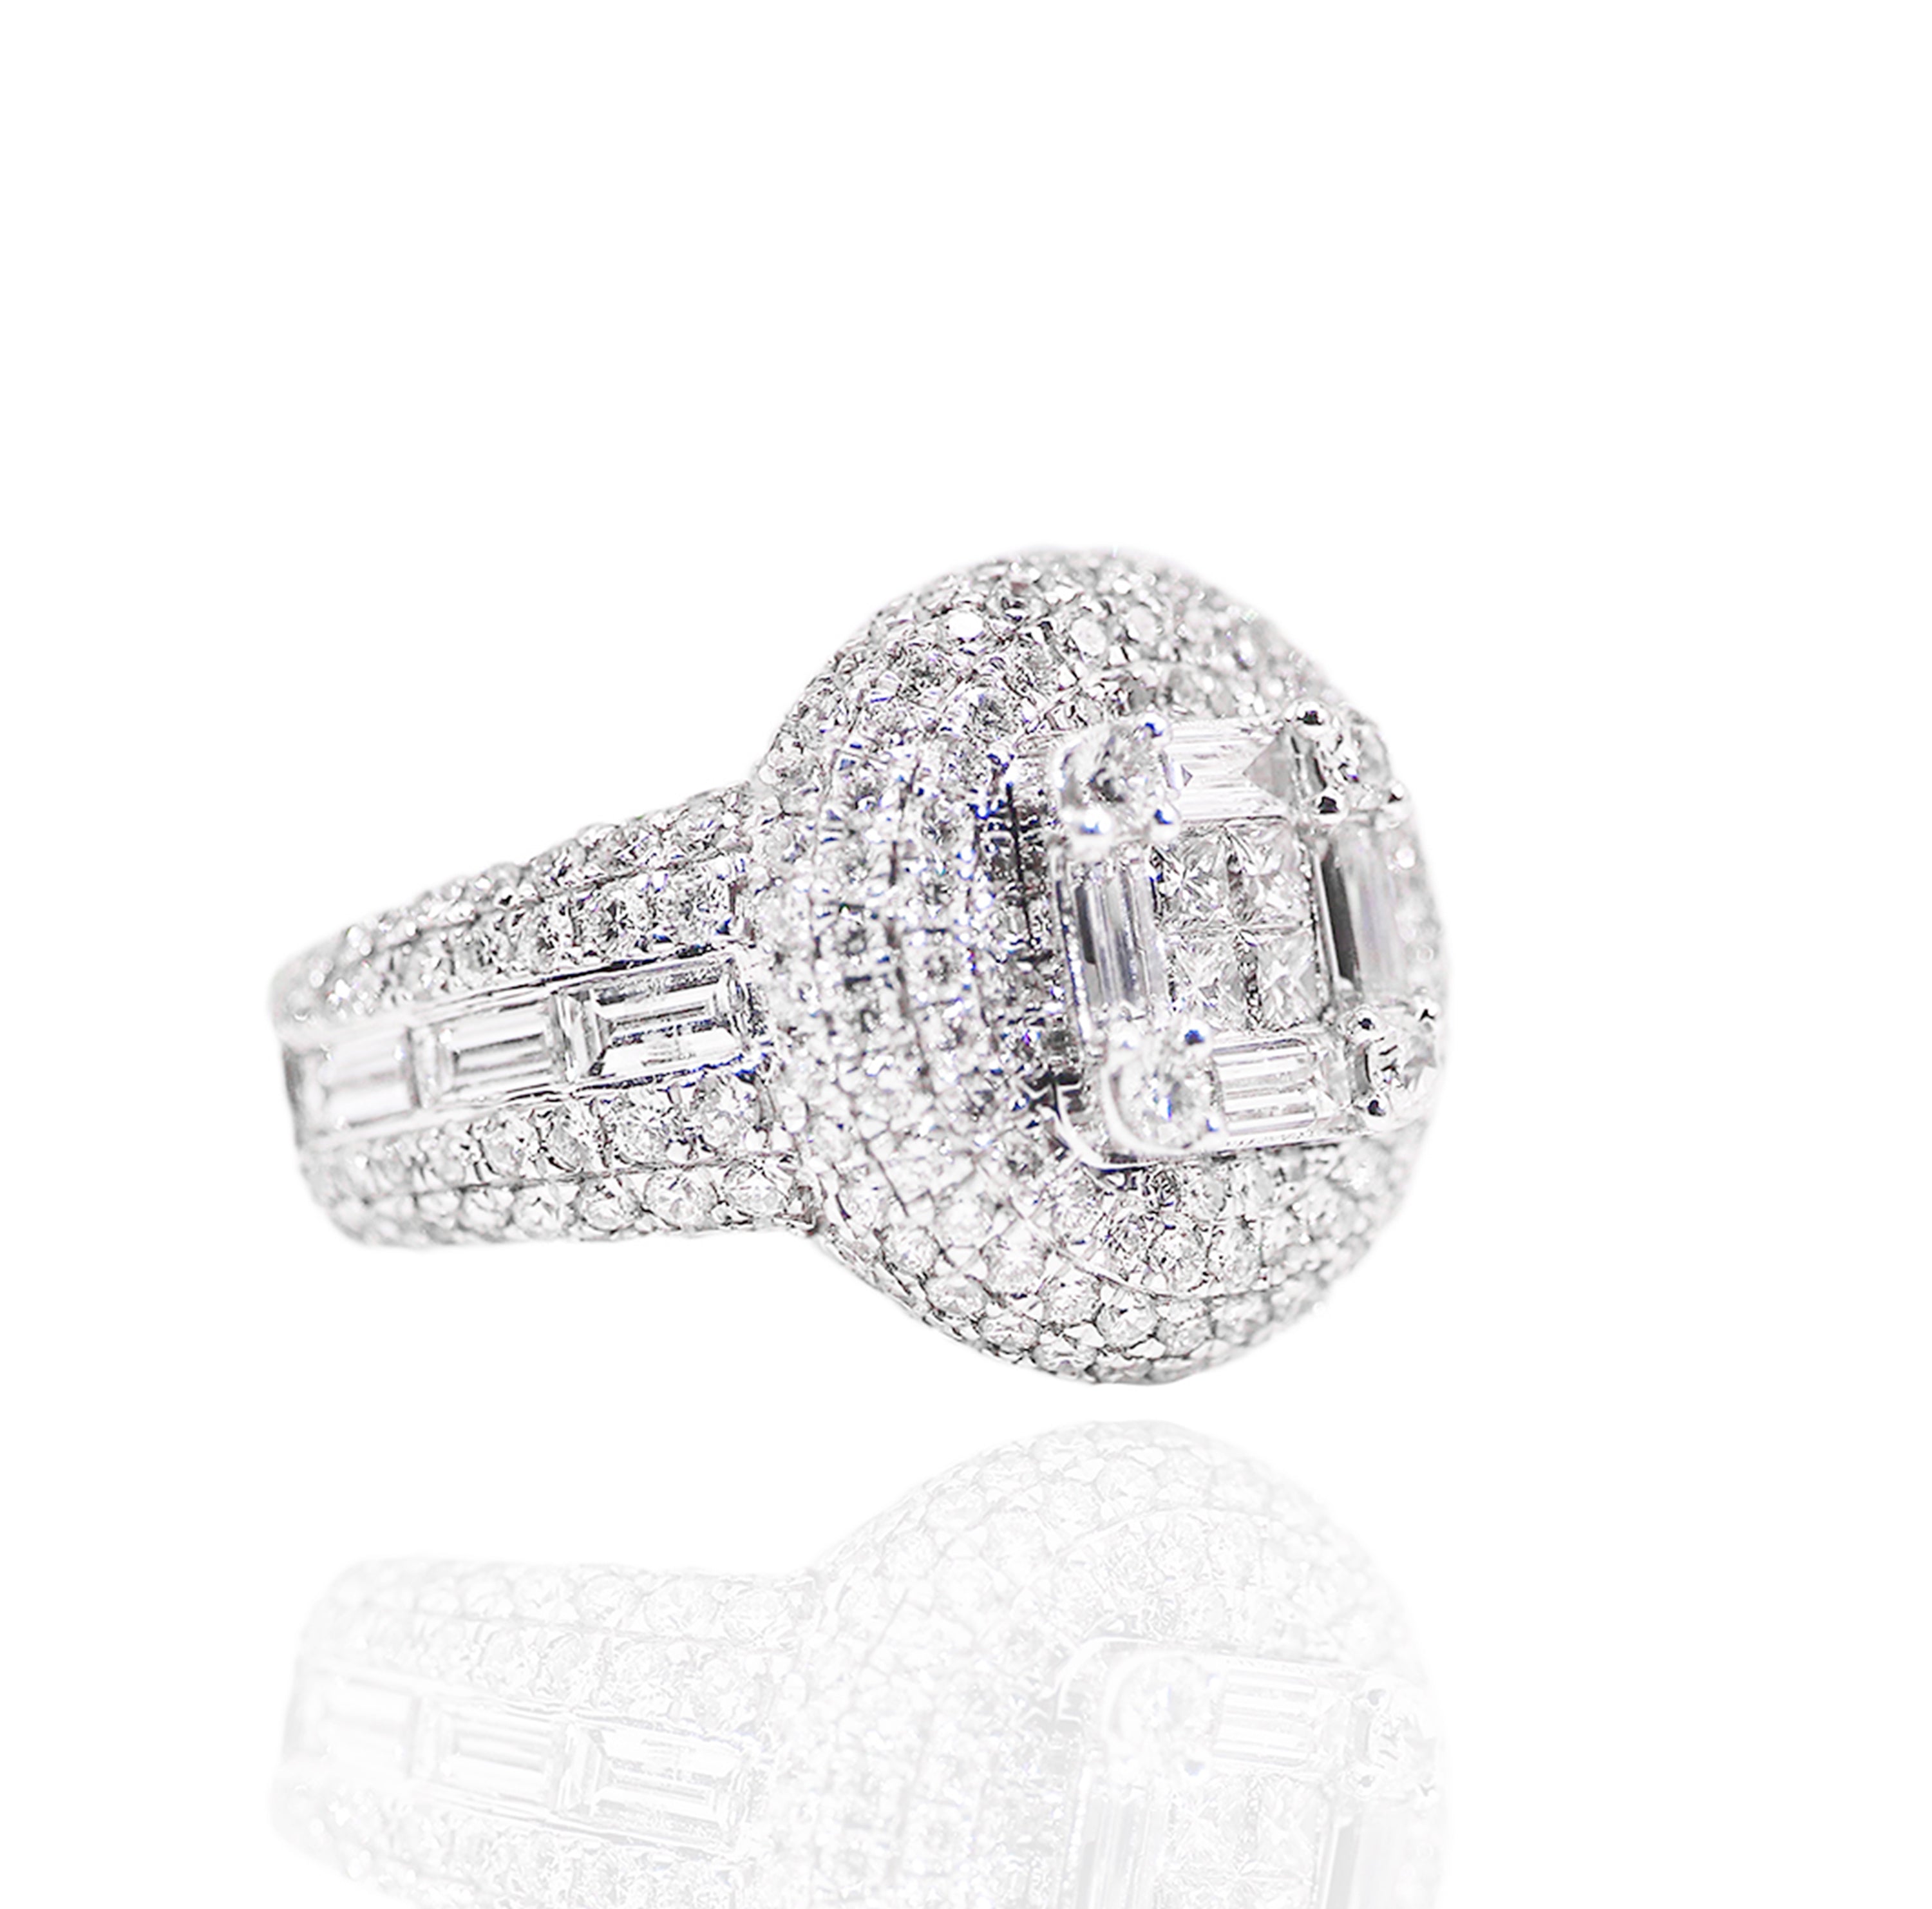 Round Top Baguette Diamond Ring